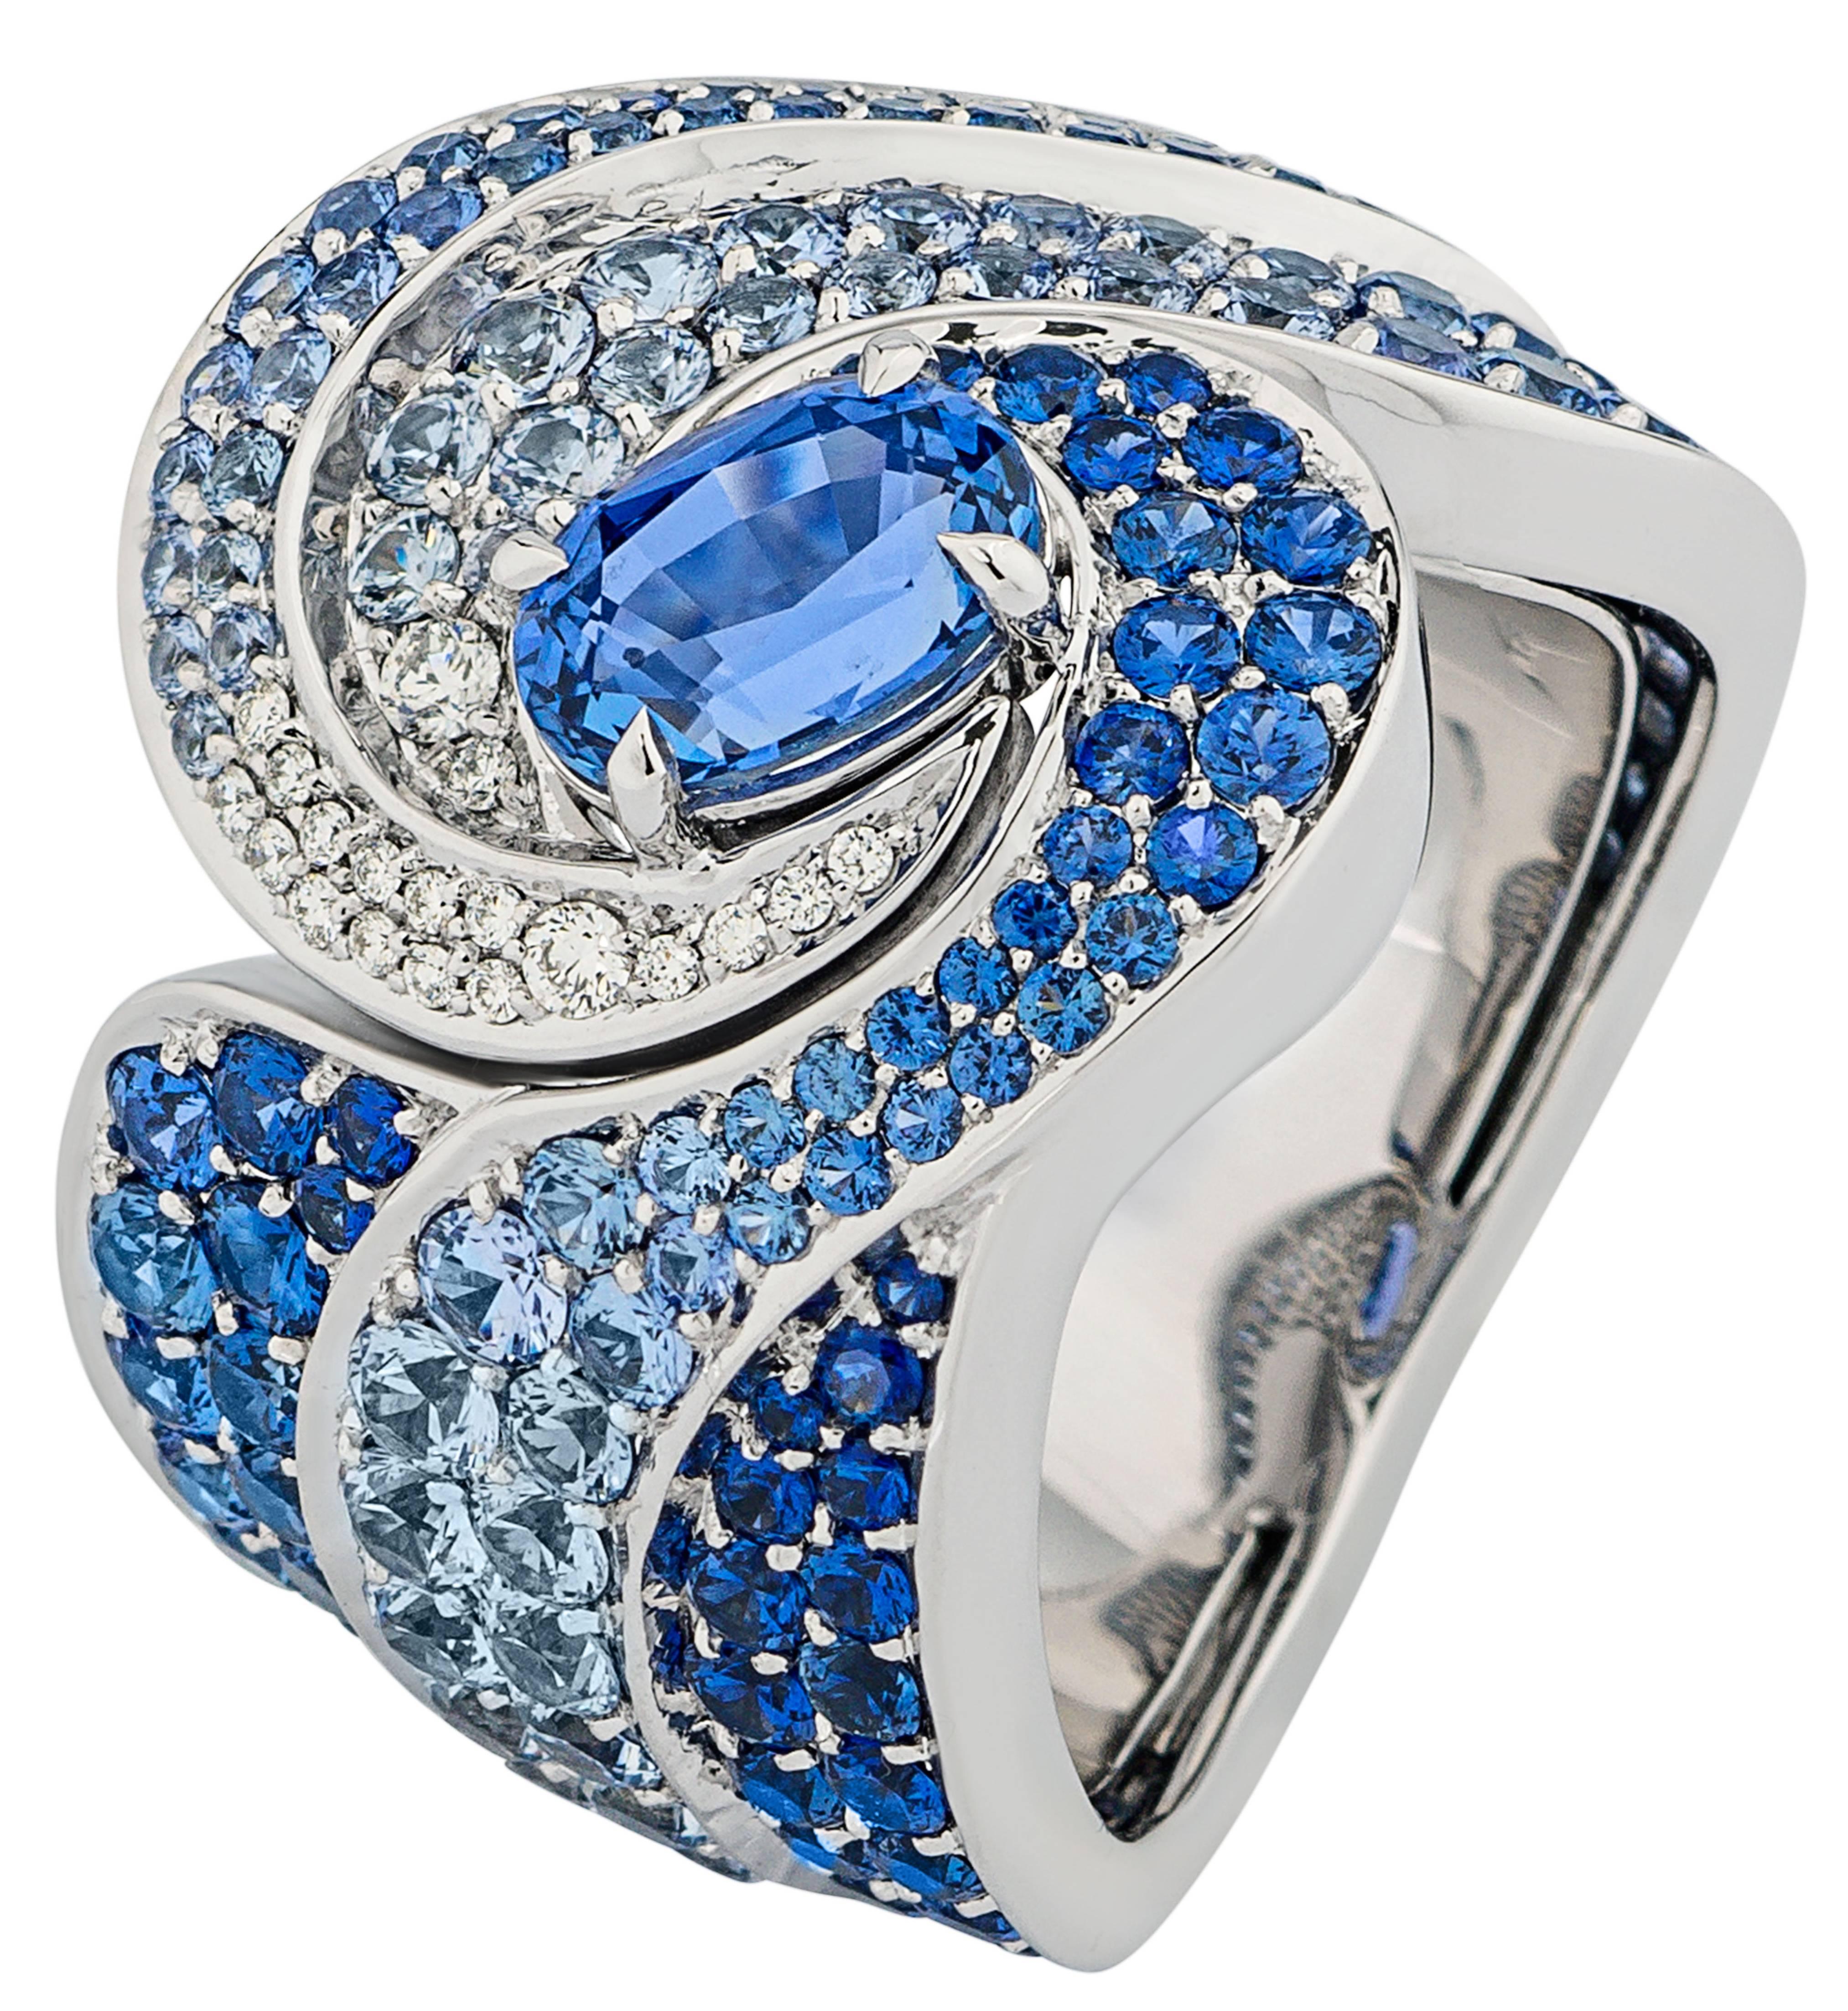 Contemporary White Gold, White Diamond and Blue Sapphire Cocktail Ring